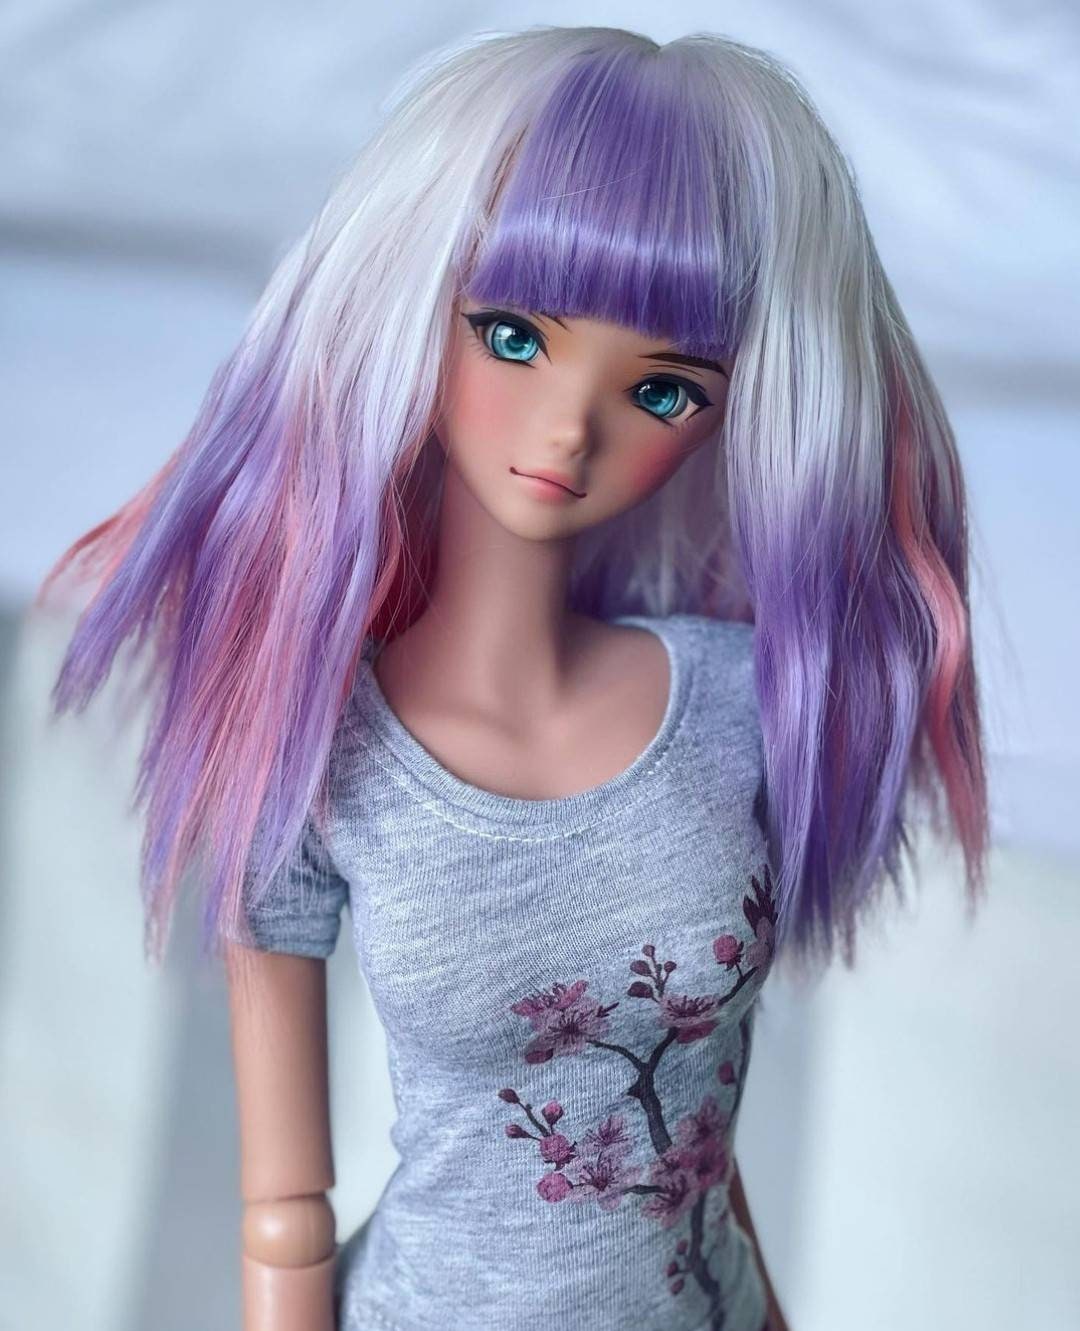 Custom doll WIG for Smart Dolls- Heat Safe - Tangle Resistant- 8.5" head size of Bjd, SD, Dollfie Dream dolls pink lavender dyed ombre